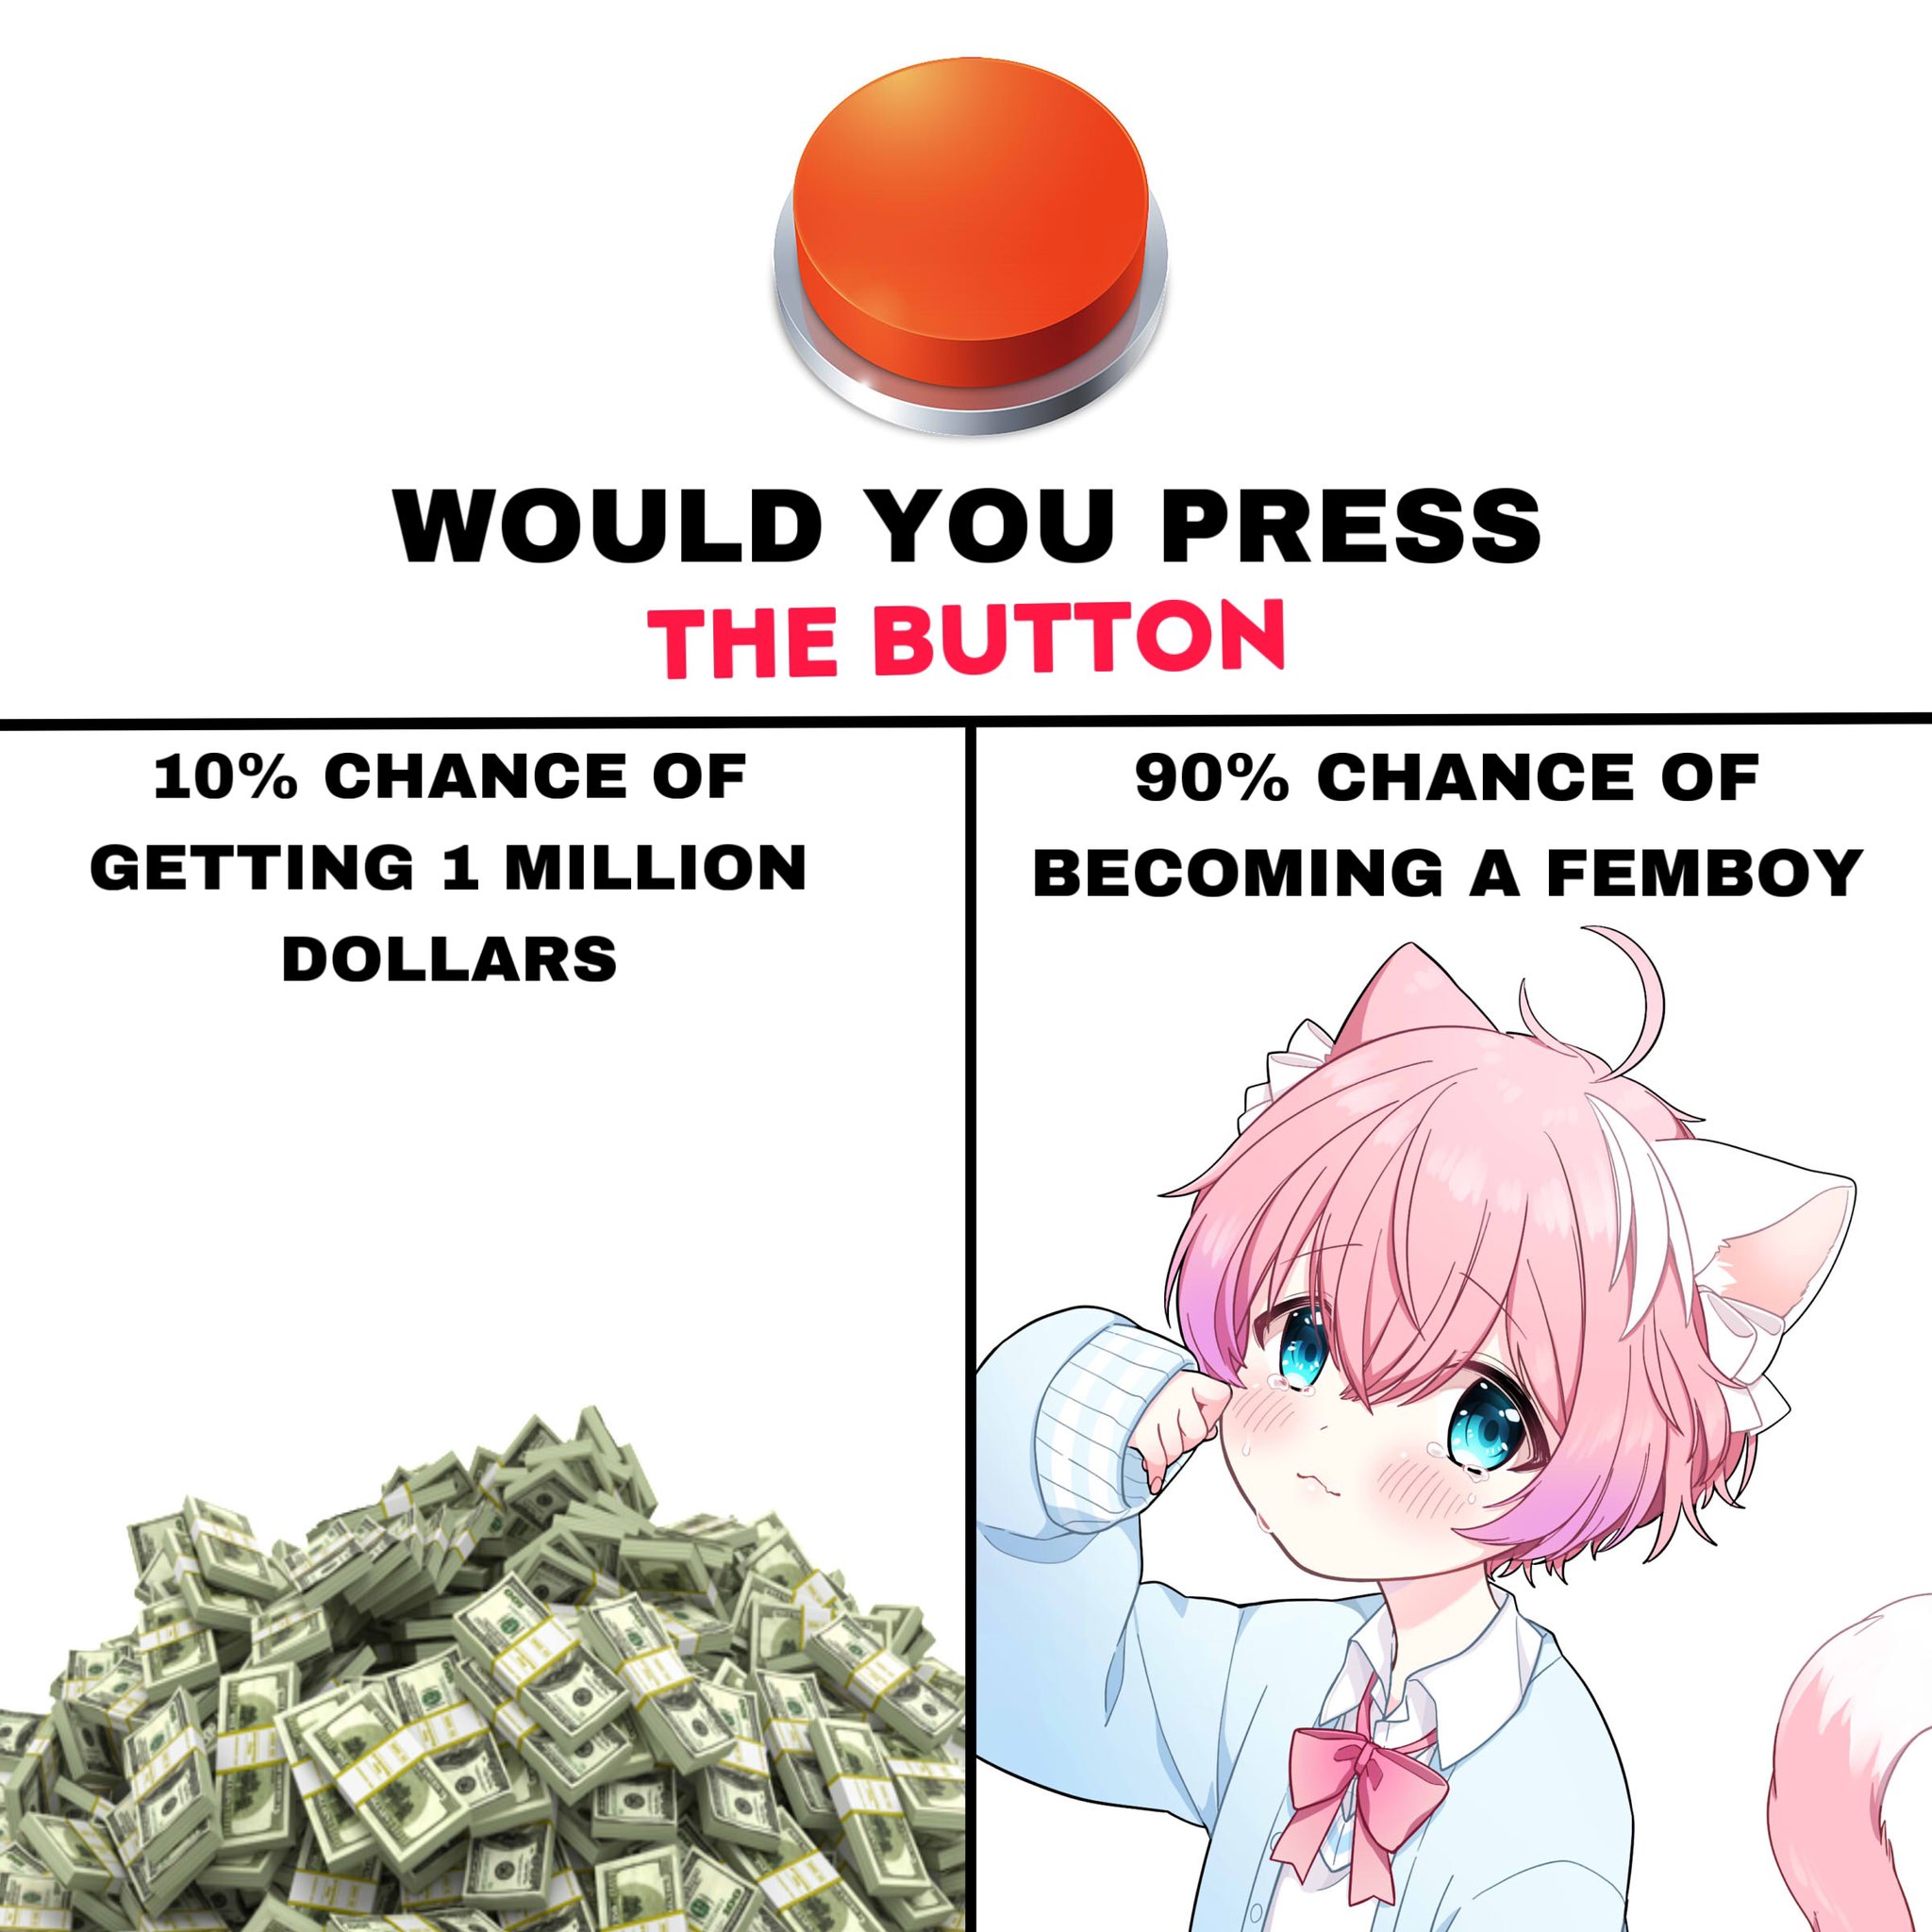 Will you press the button? 100% would press the button. There is